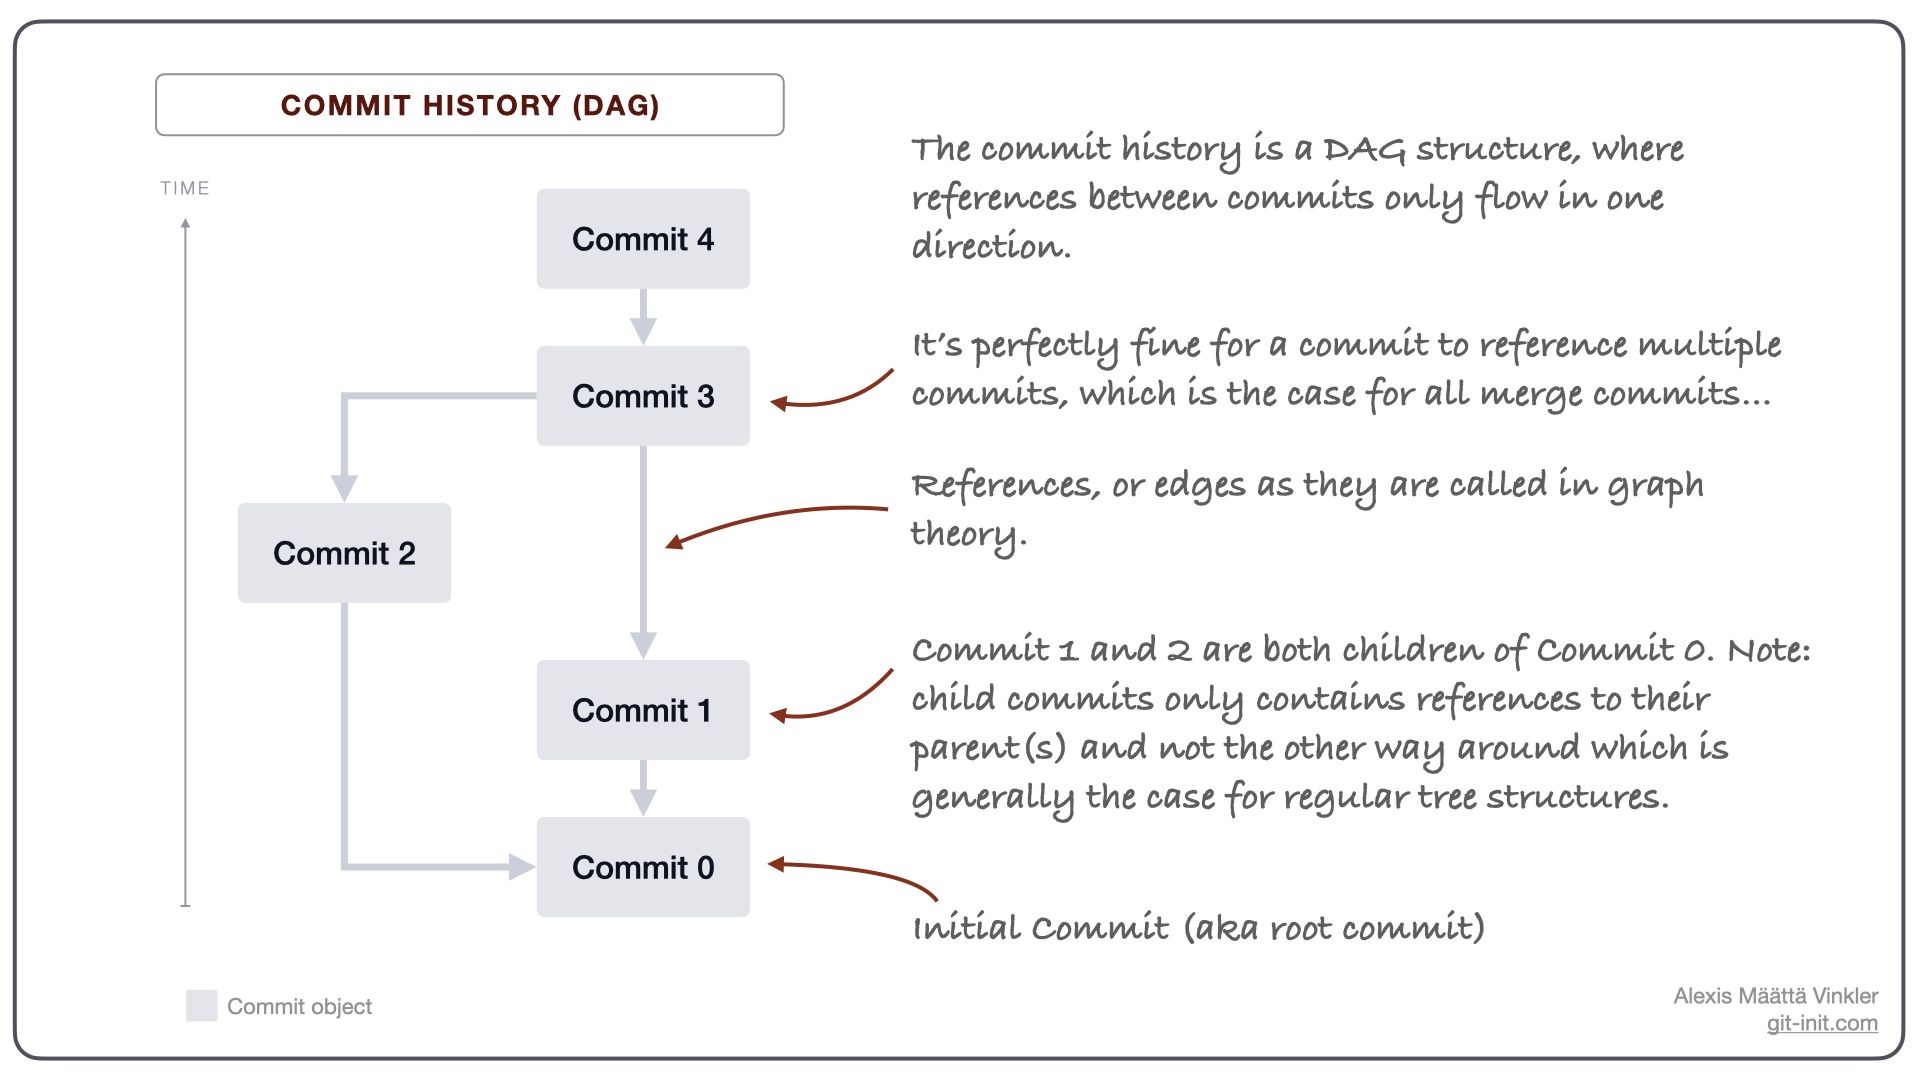 DAG illustration from a Git commit history perspective